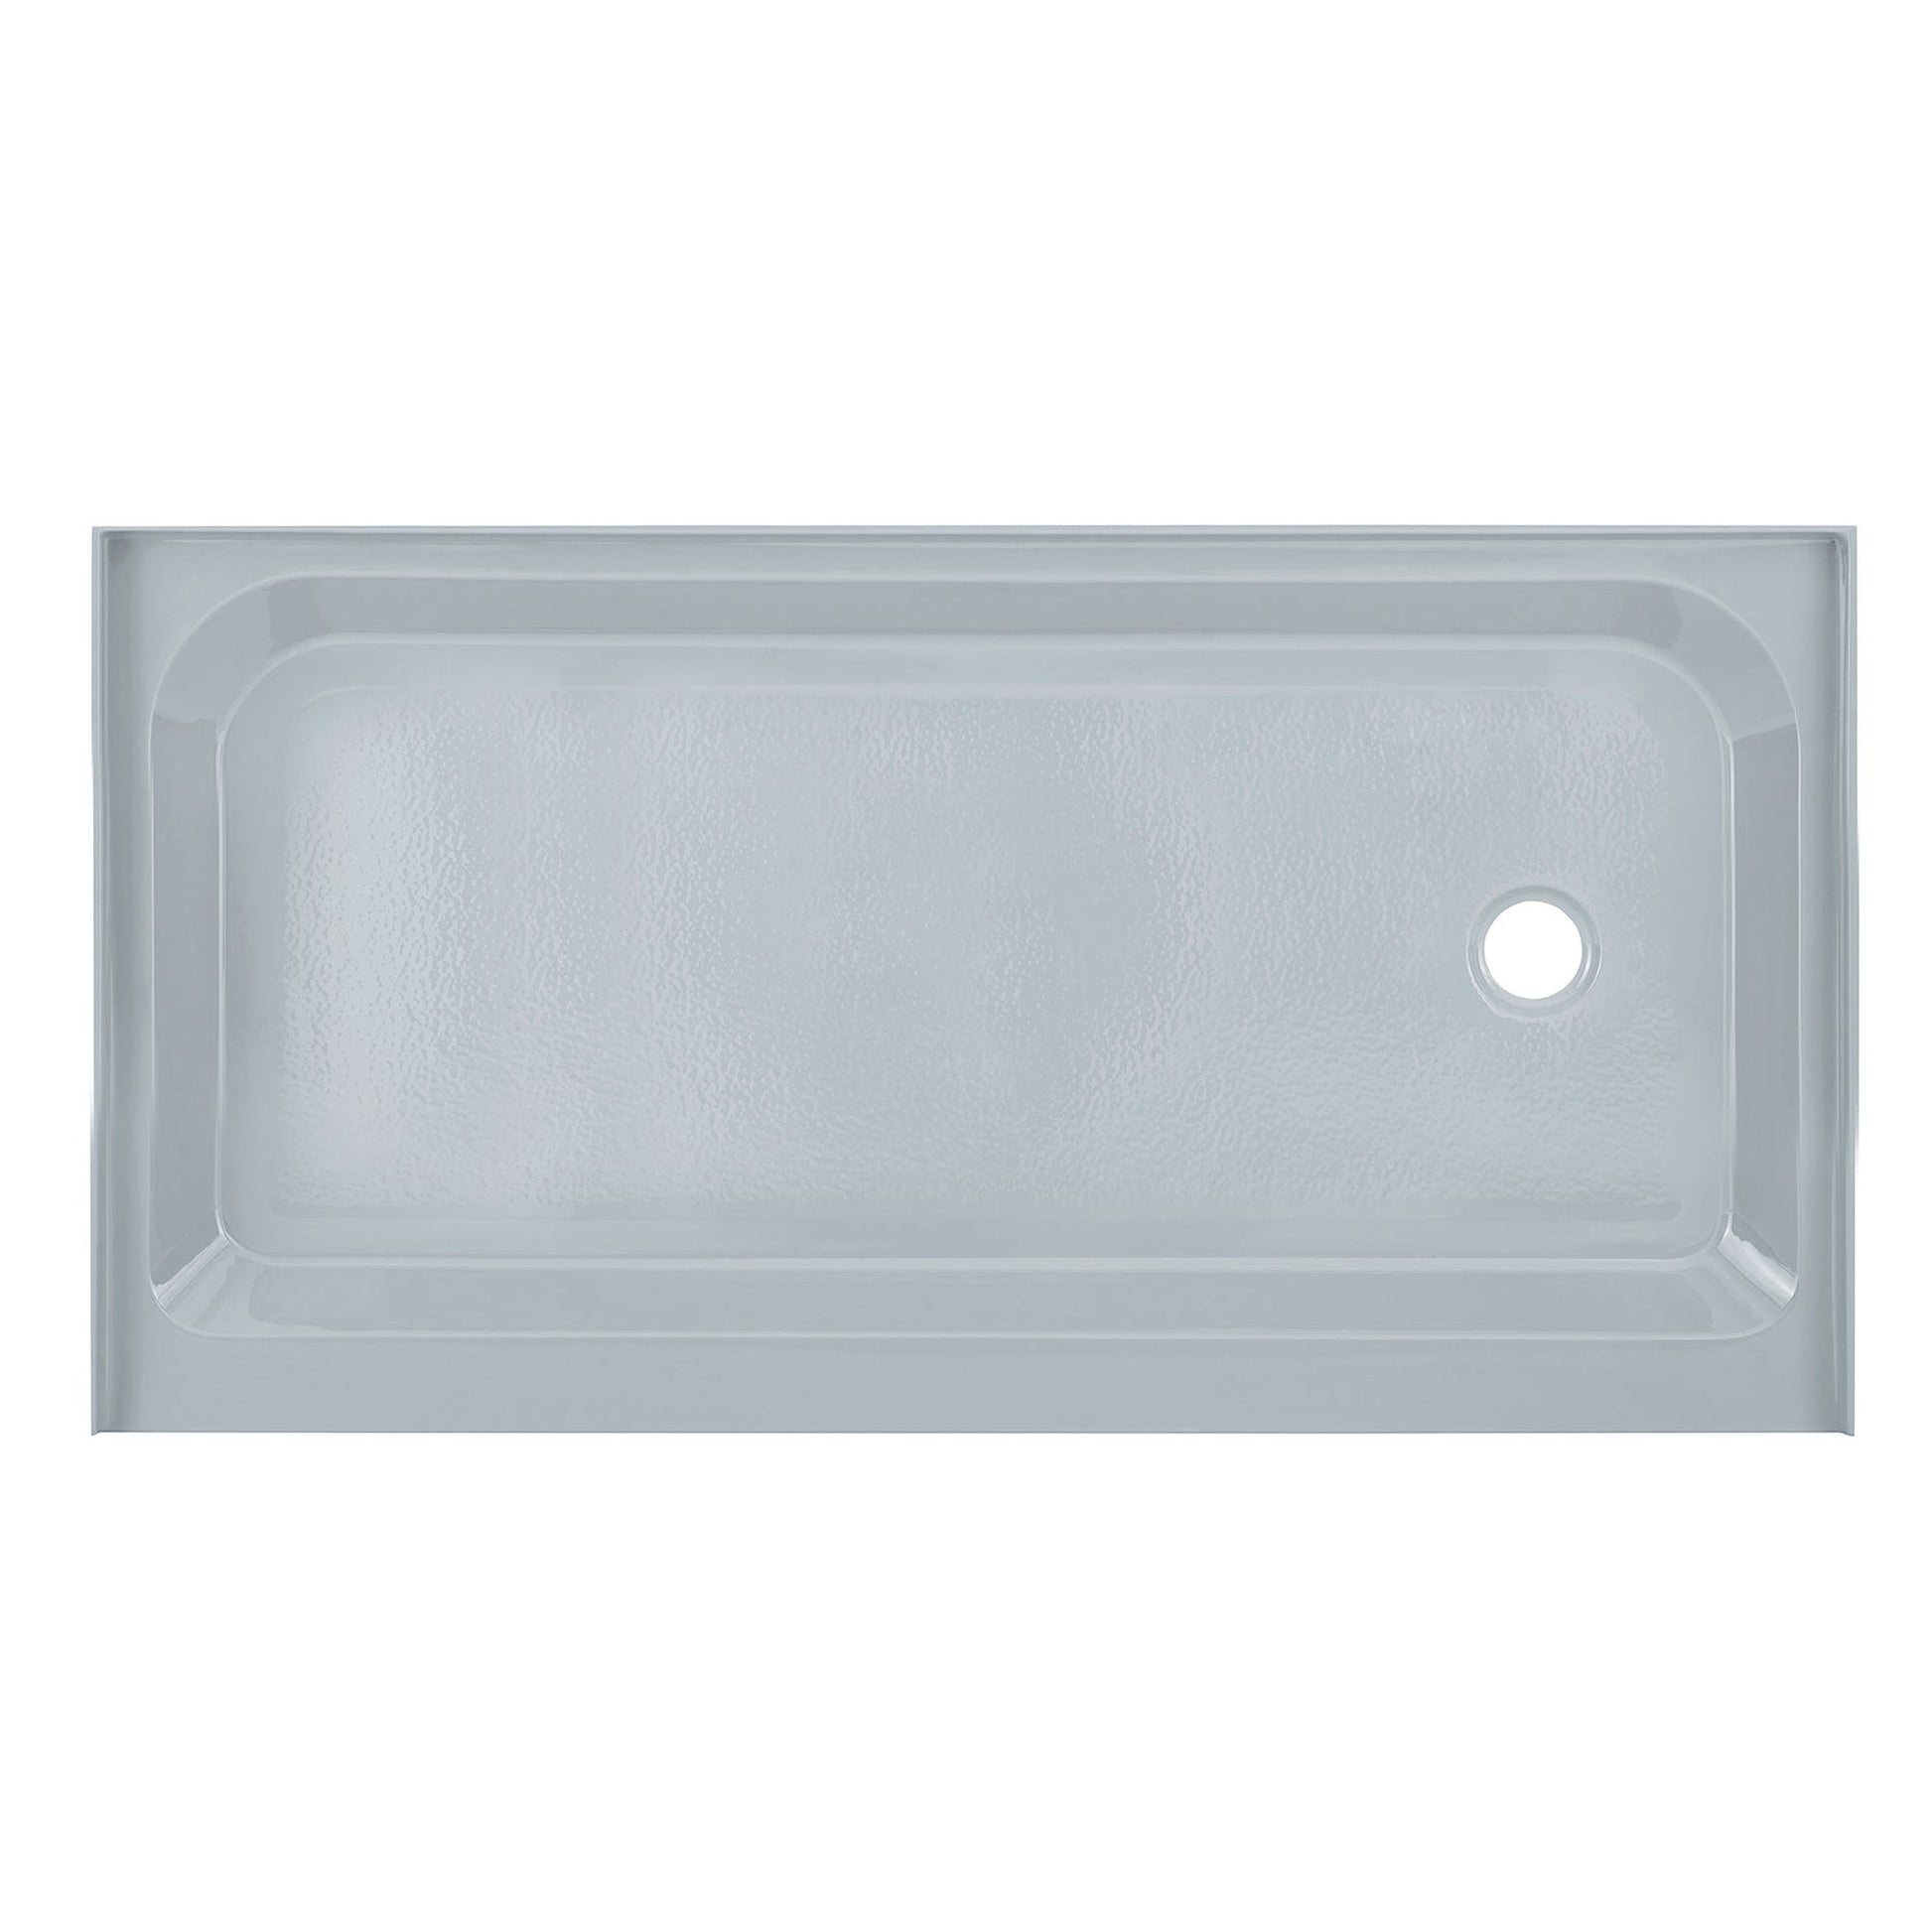 https://usbathstore.com/cdn/shop/files/Swiss-Madison-Voltaire-60-x-32-Three-Wall-Alcove-Gray-Right-Hand-Drain-Shower-Base-With-Built-In-Integral-Flange.jpg?v=1694760032&width=1946